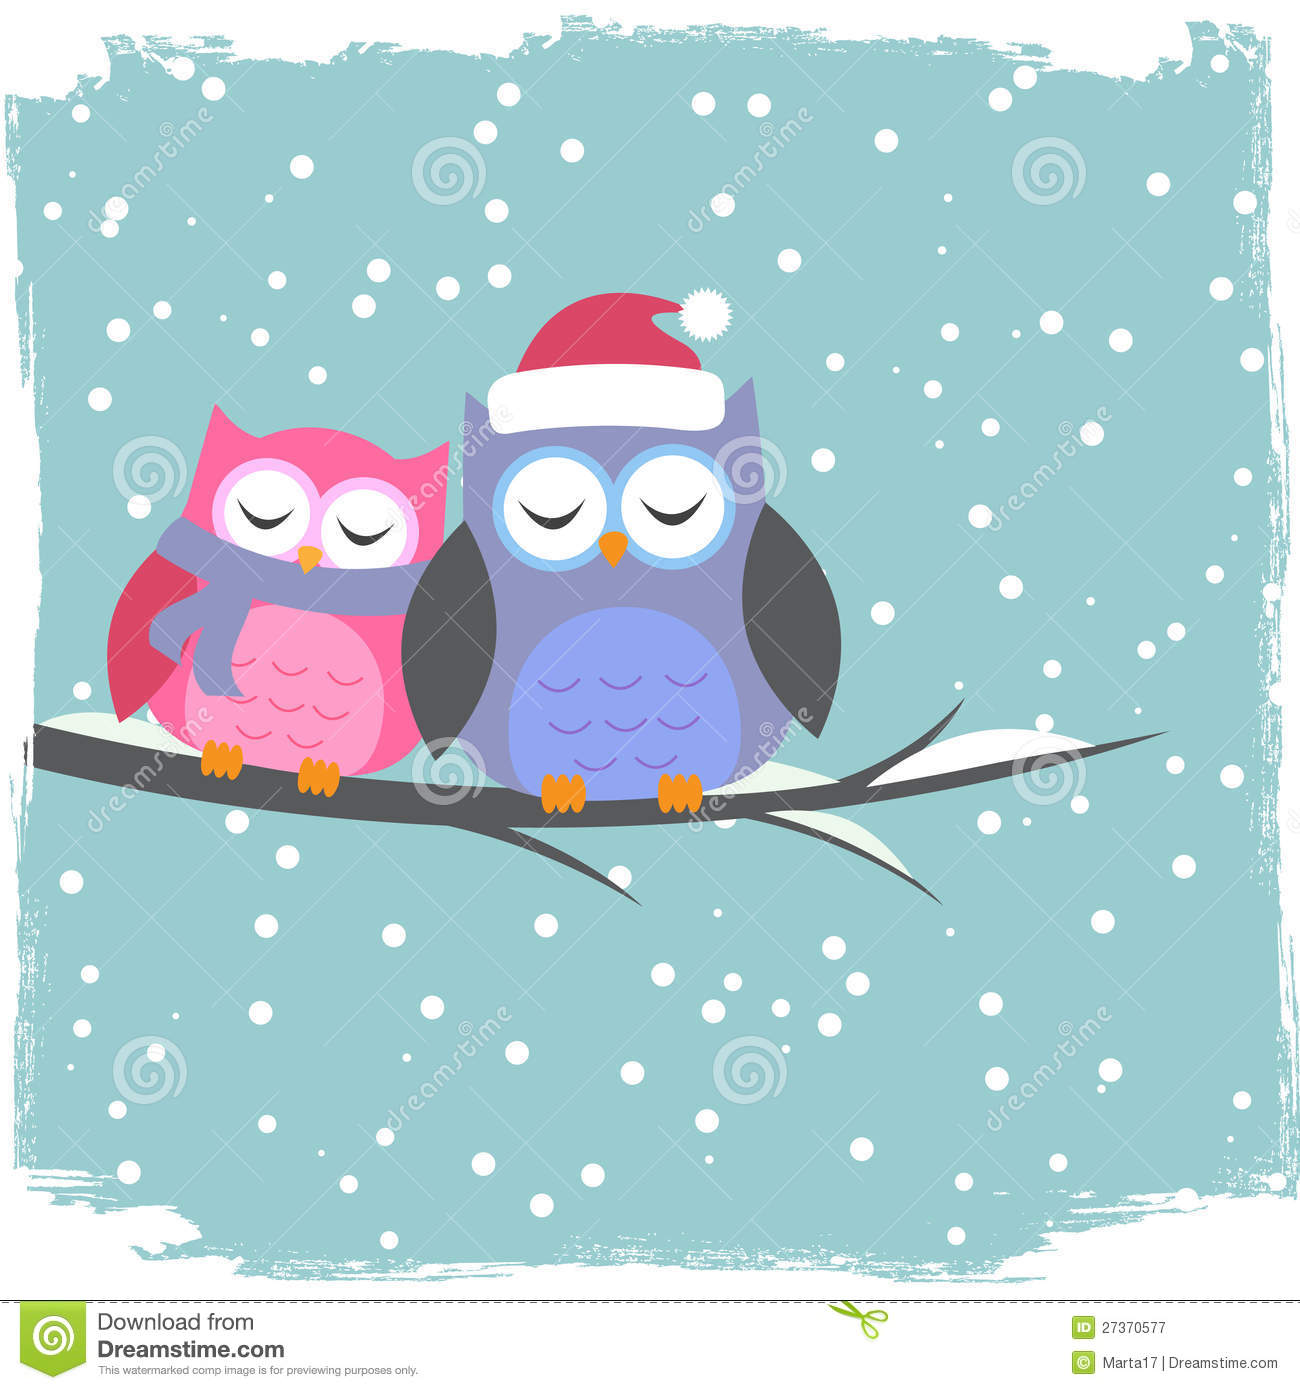 Winter Card With Cute Owls Royalty Free Stock Photography   Image